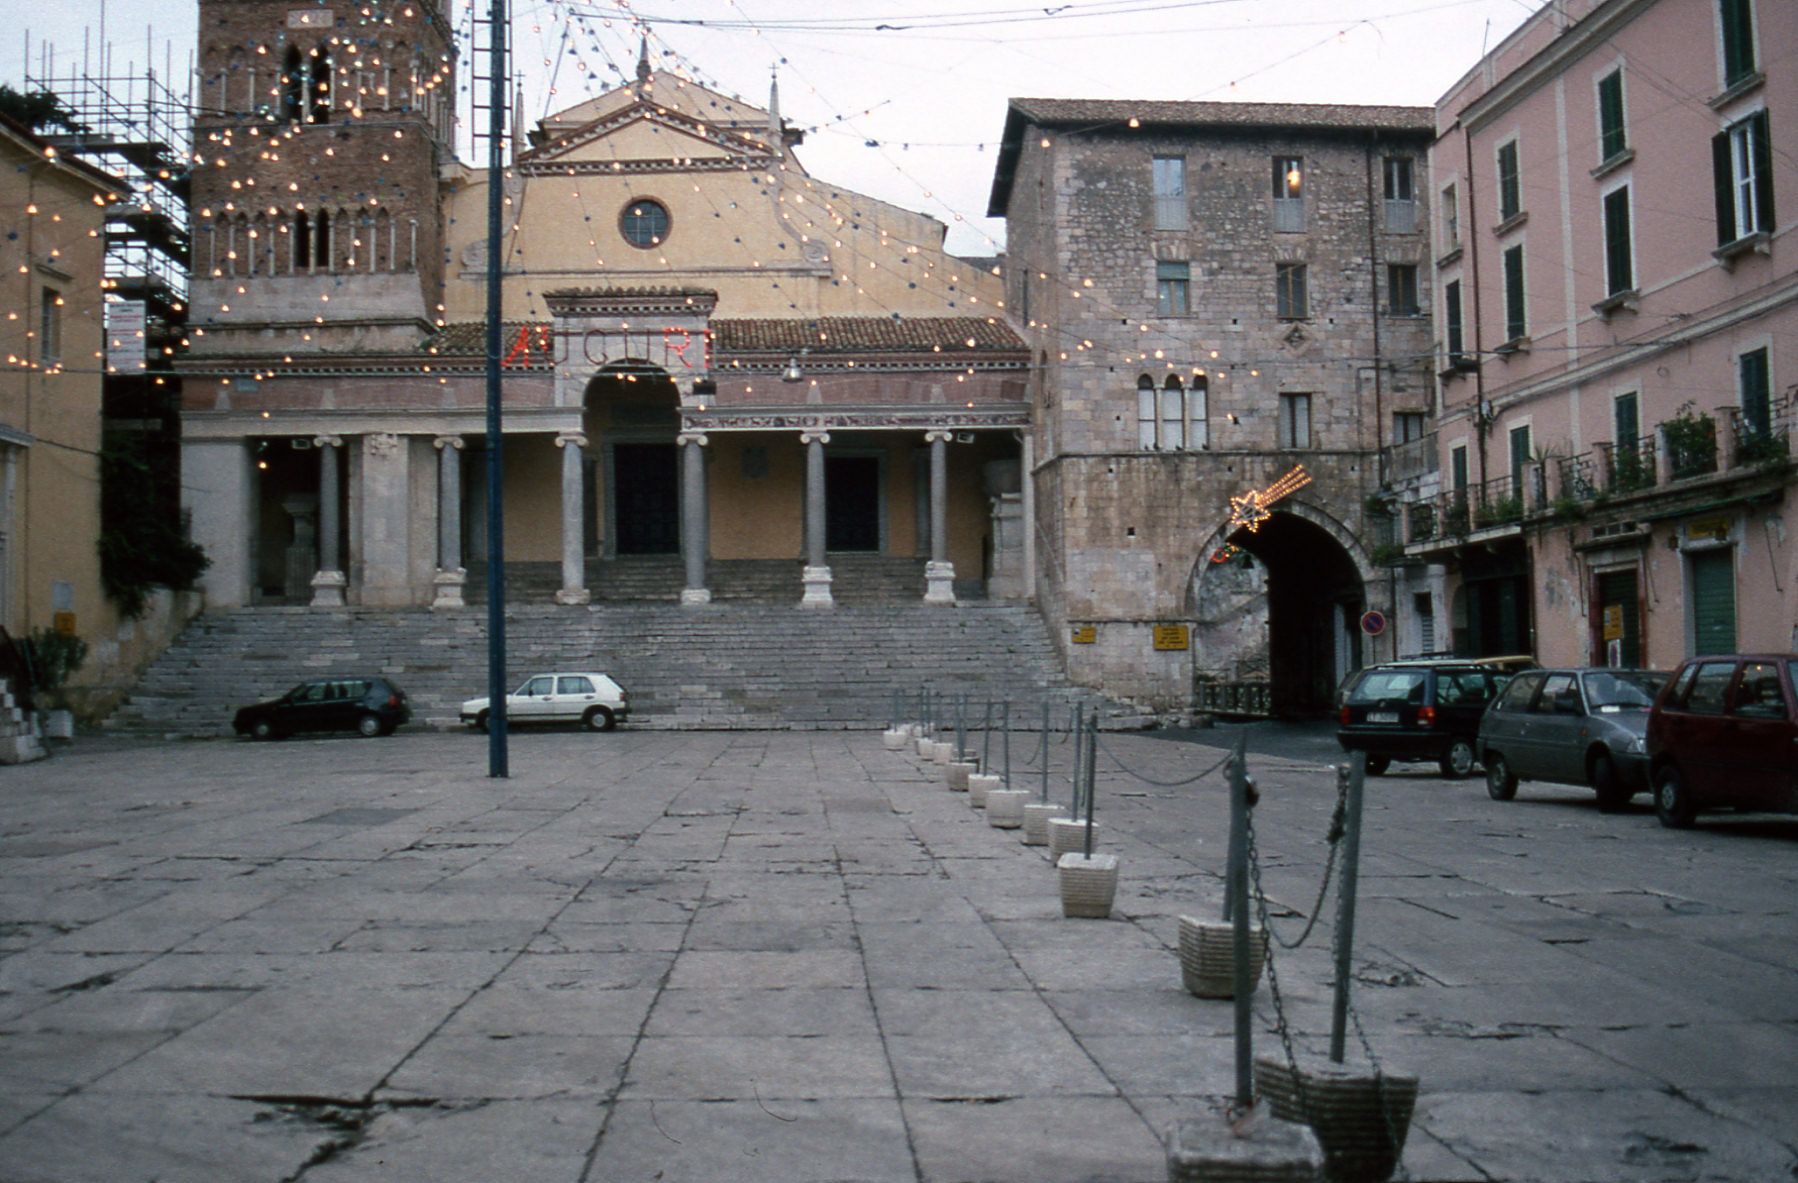 Paving of the Forum